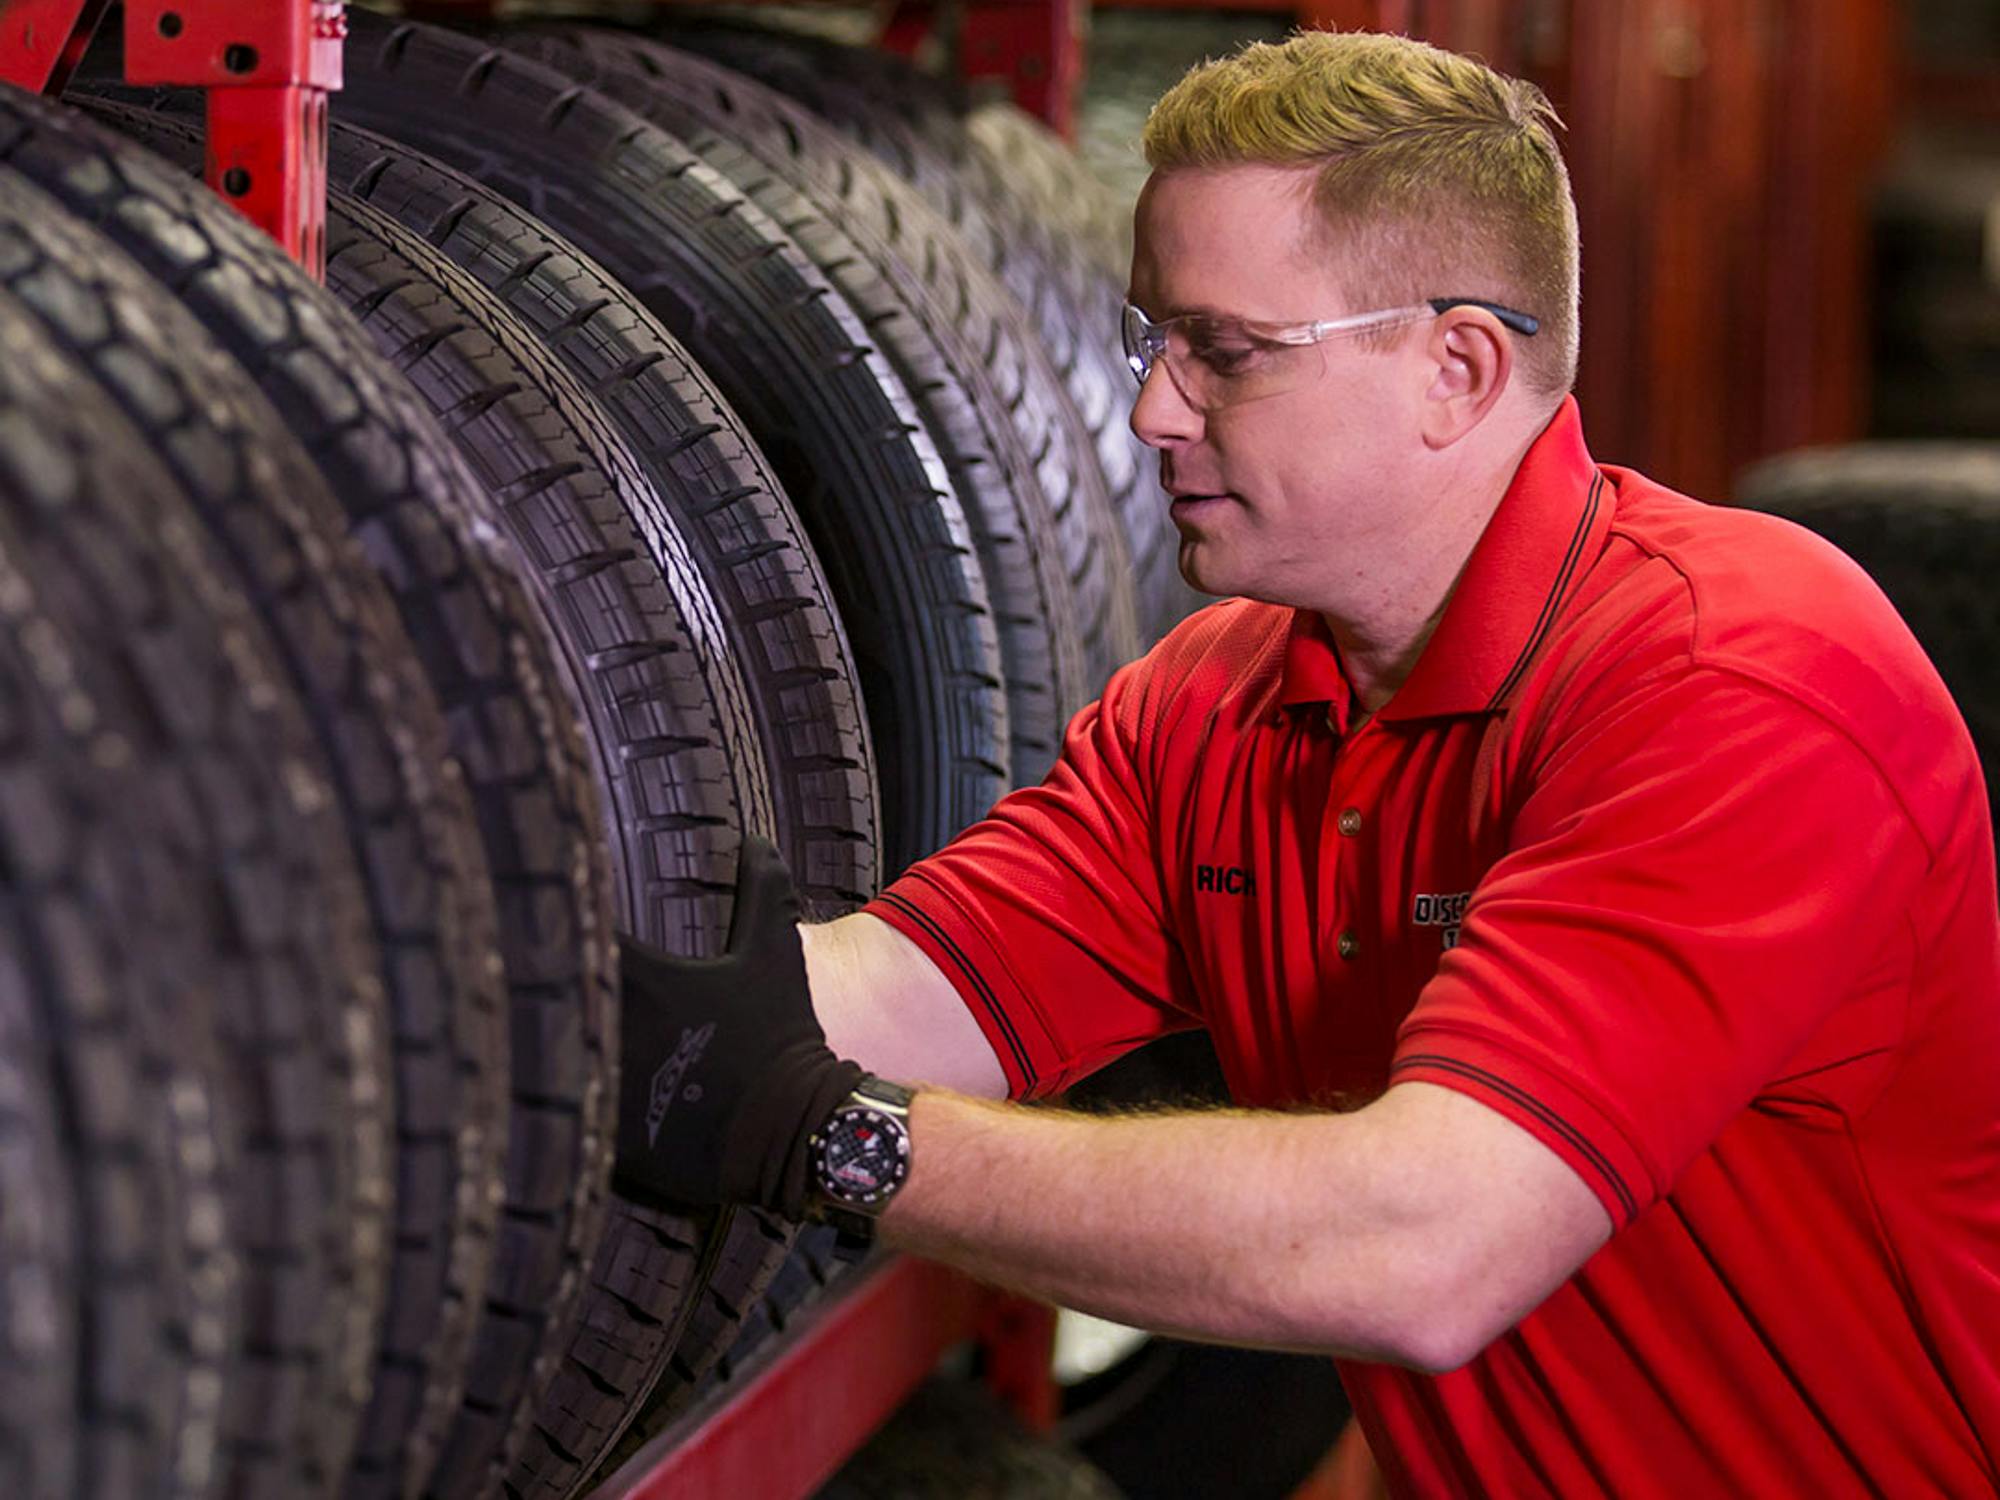 A Discount Tire employee taking a tire from a shelf